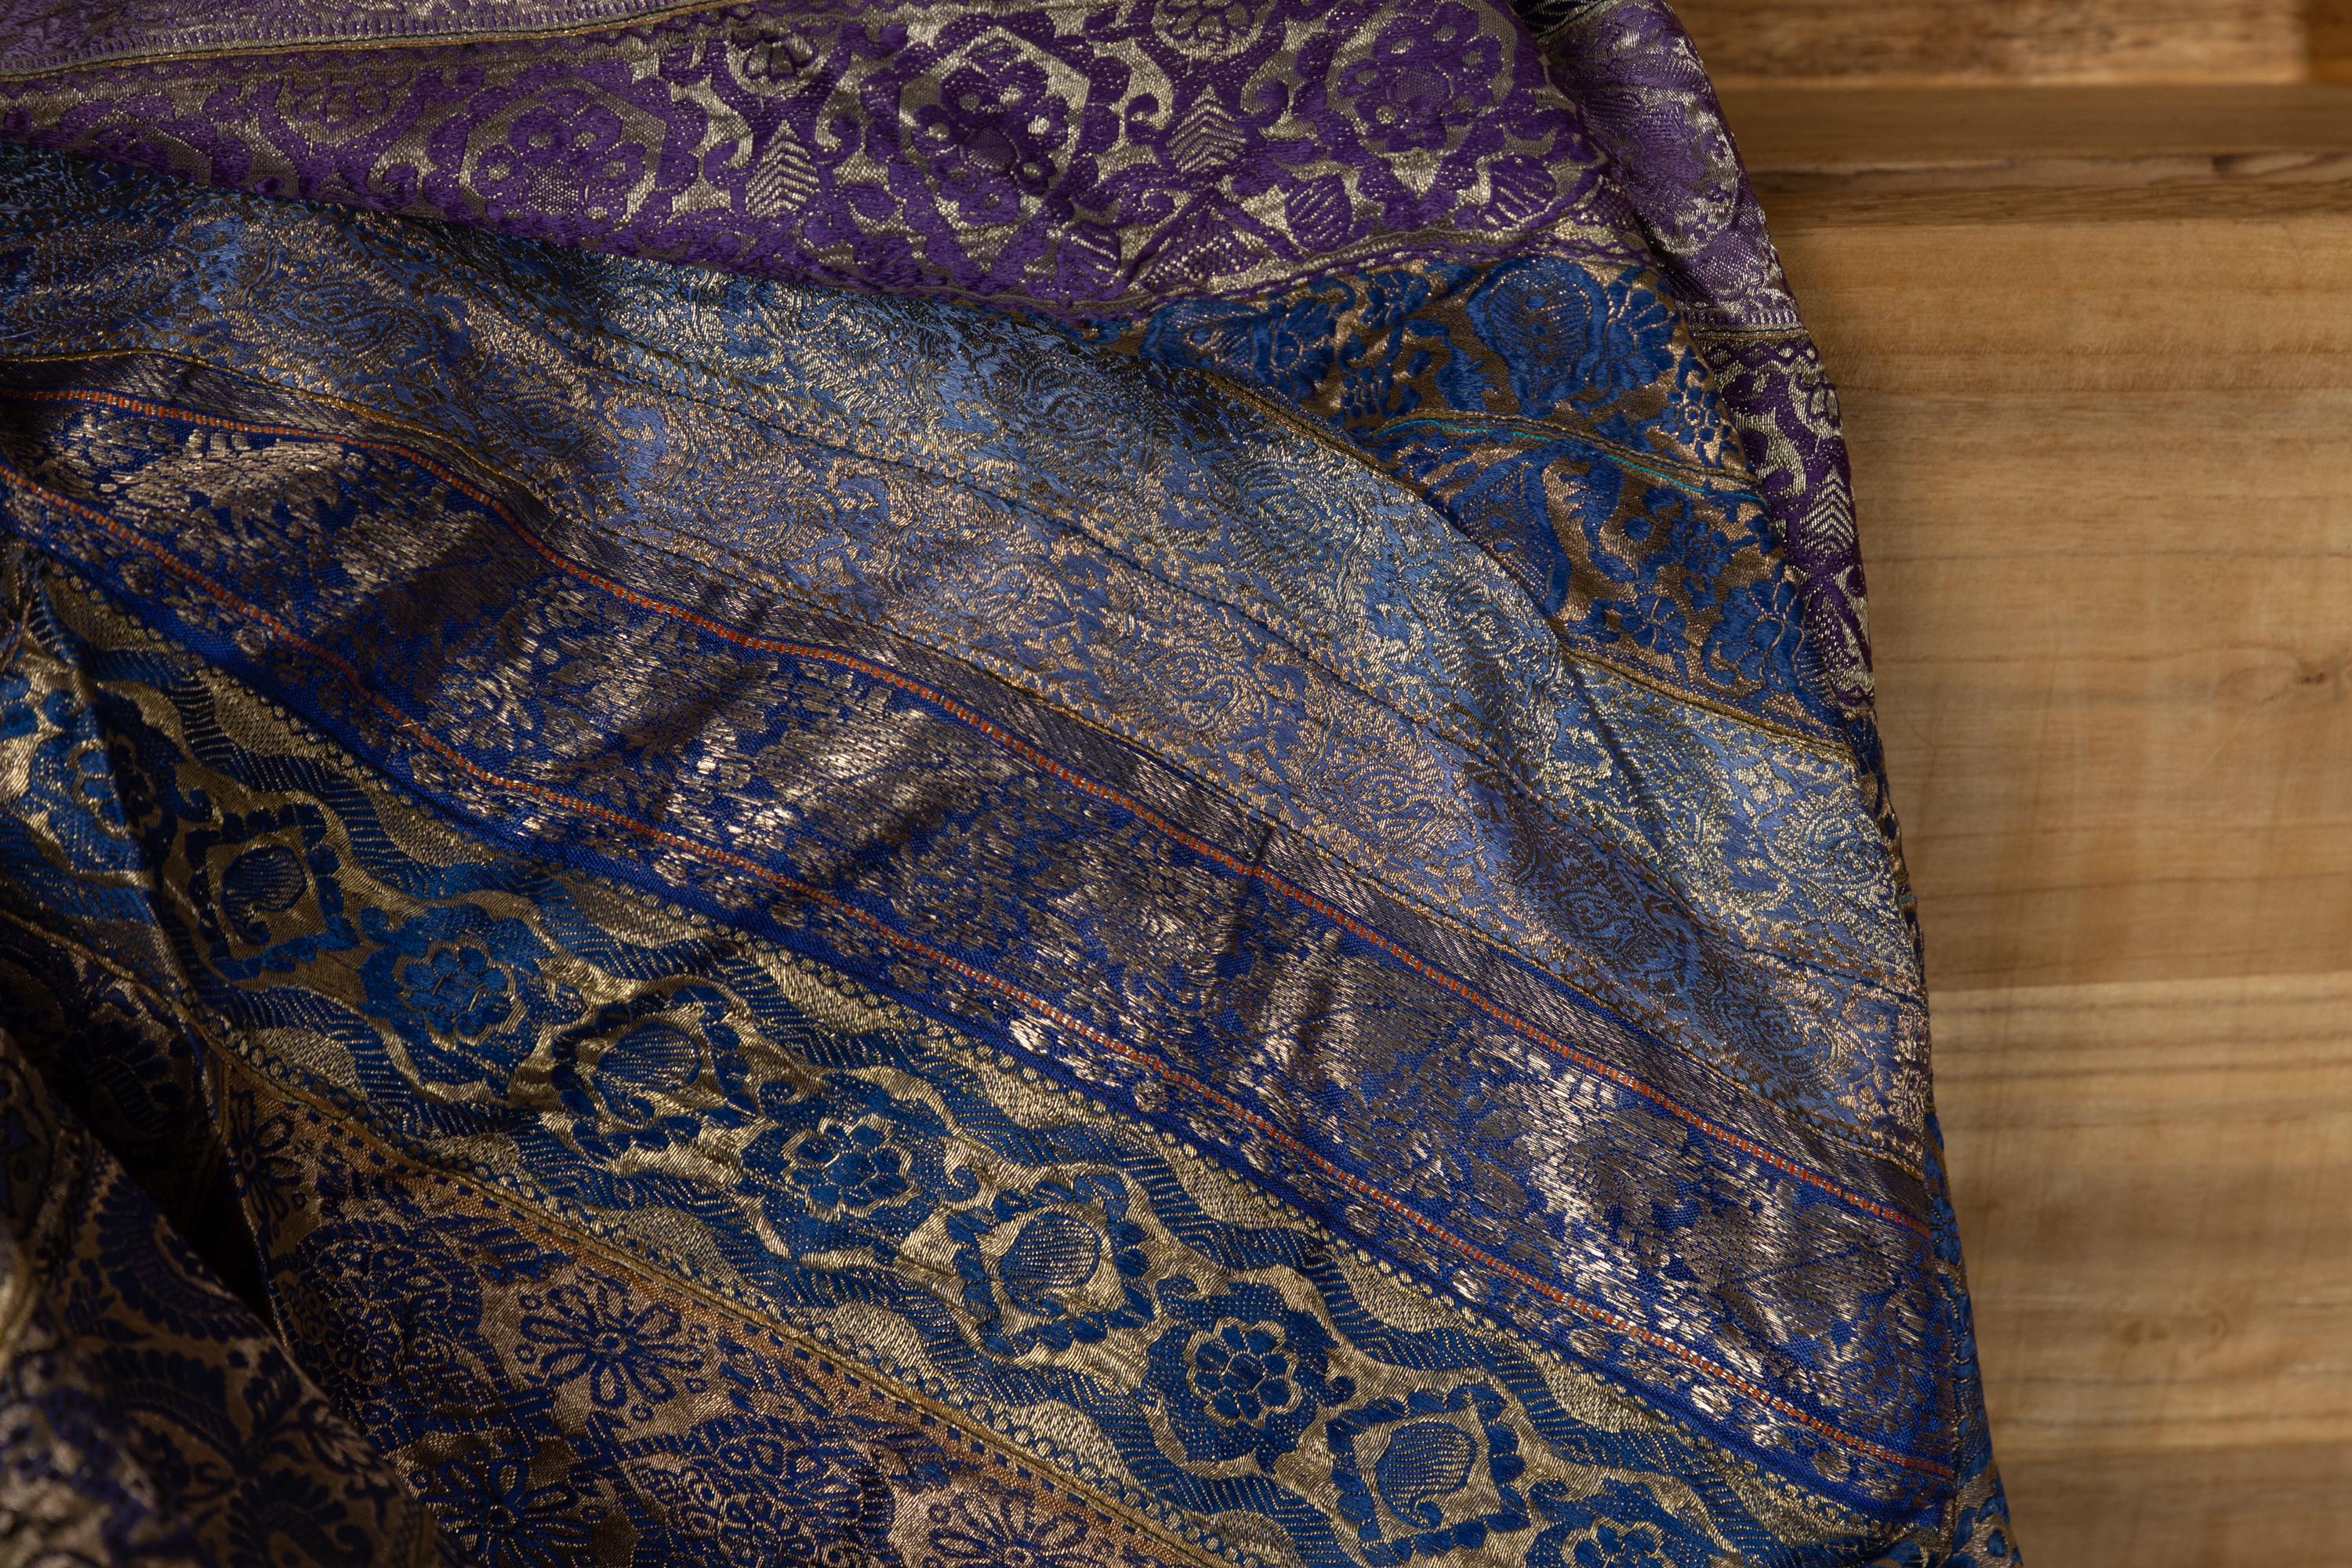 Vintage Indian Silk Embroidered Fabric with Purple, Silver and Gold Tones 14